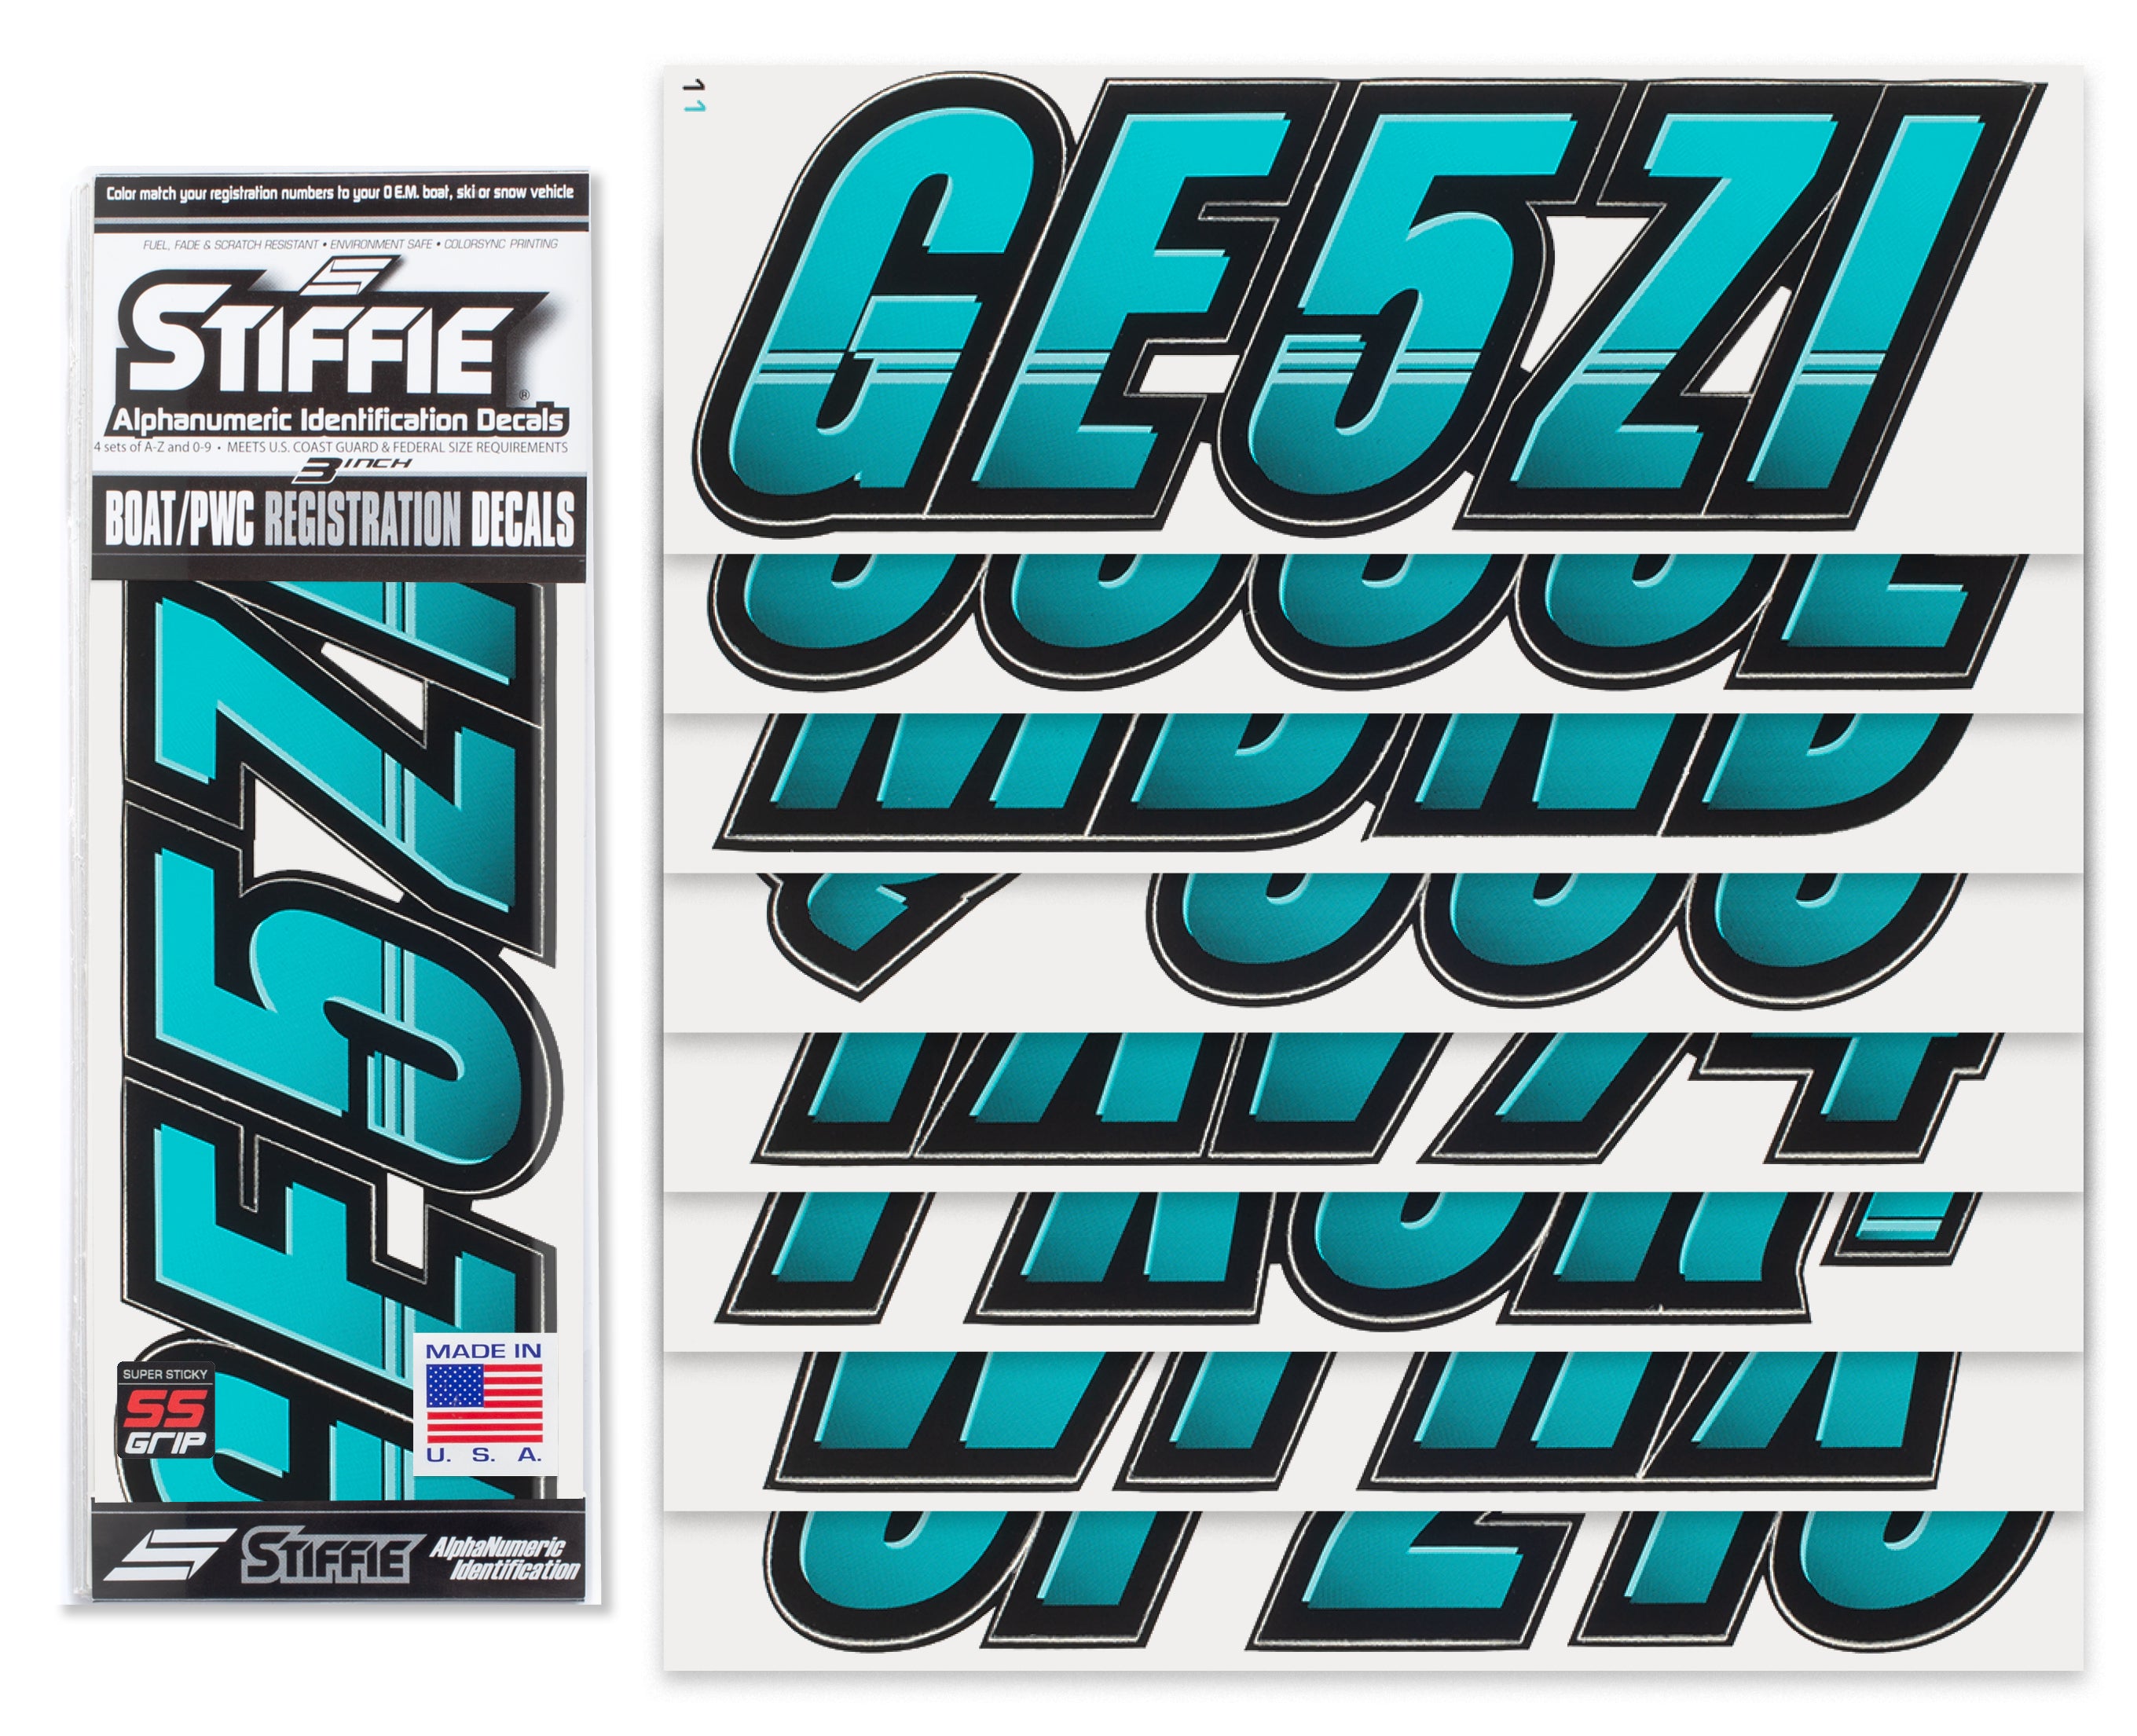 Stiffie Techtron Candy Blue/Black Super Sticky 3" Alpha Numeric Registration Identification Numbers Stickers Decals for Sea-Doo Spark, Inflatable Boats, Ribs, Hypalon/PVC, PWC and Boats